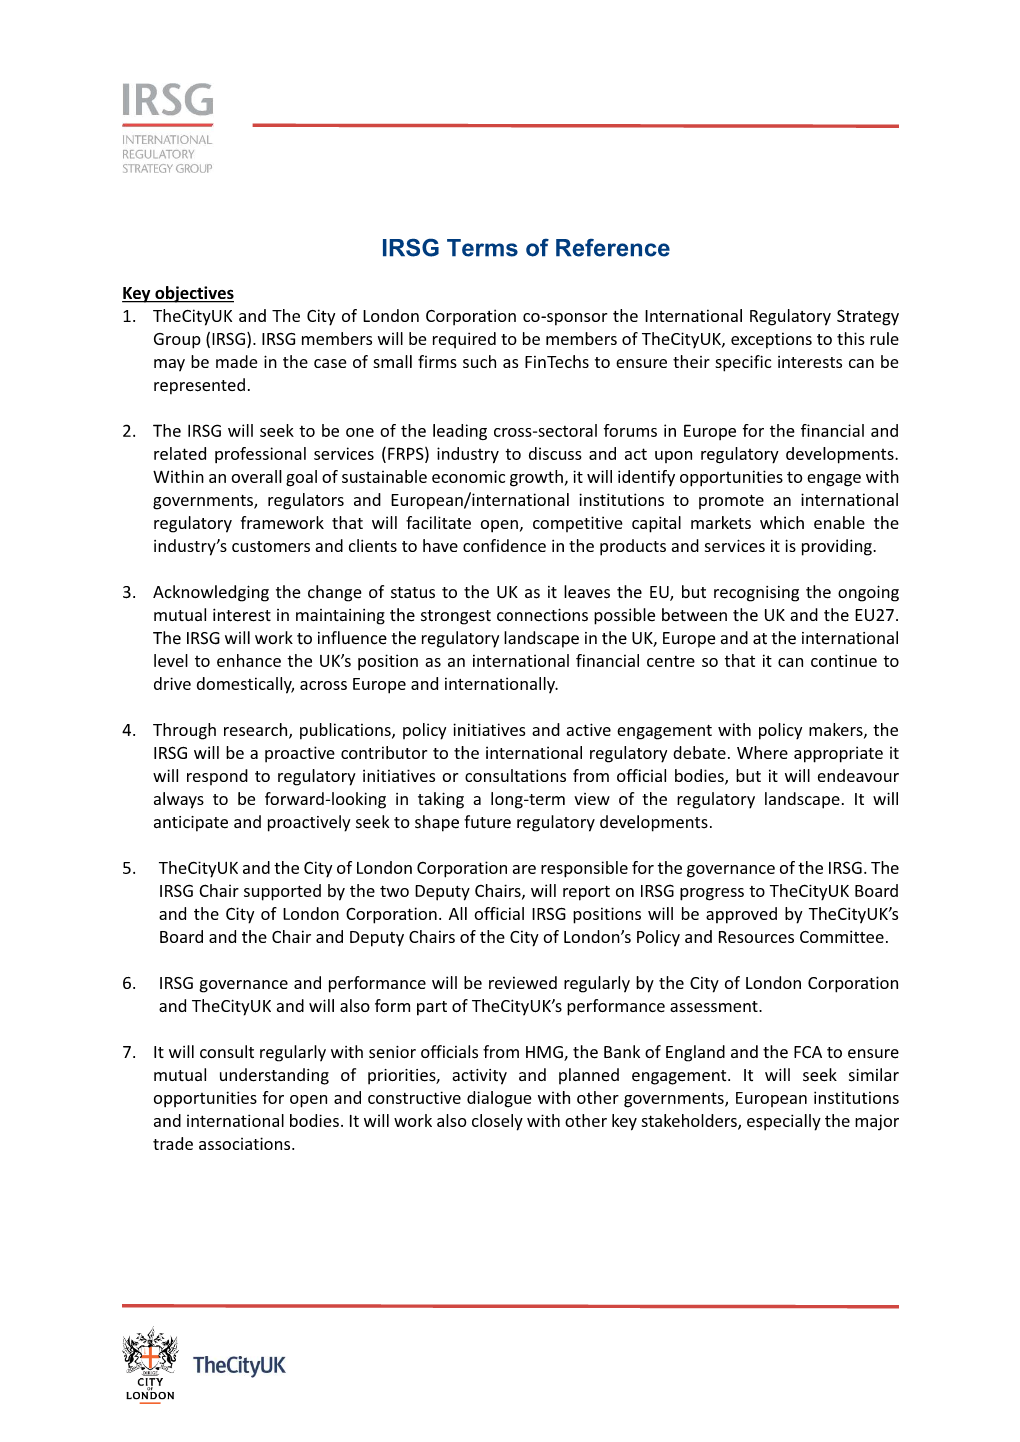 IRSG Terms of Reference